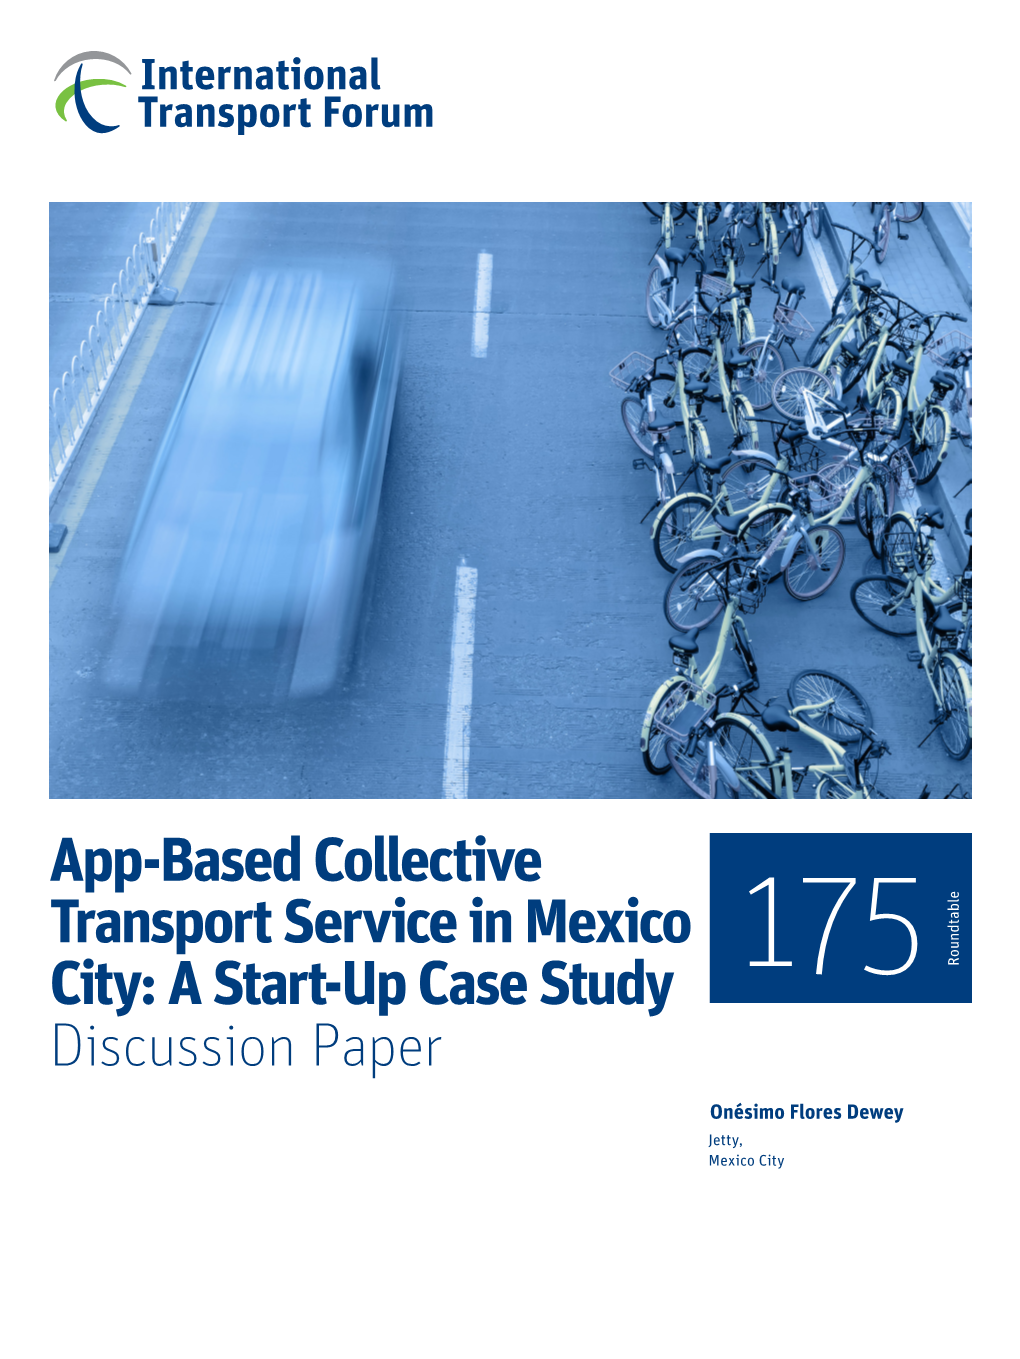 App-Based Collective Transport Service in Mexico City: a Start-Up Case Study 175 Roundtable Discussion Paper